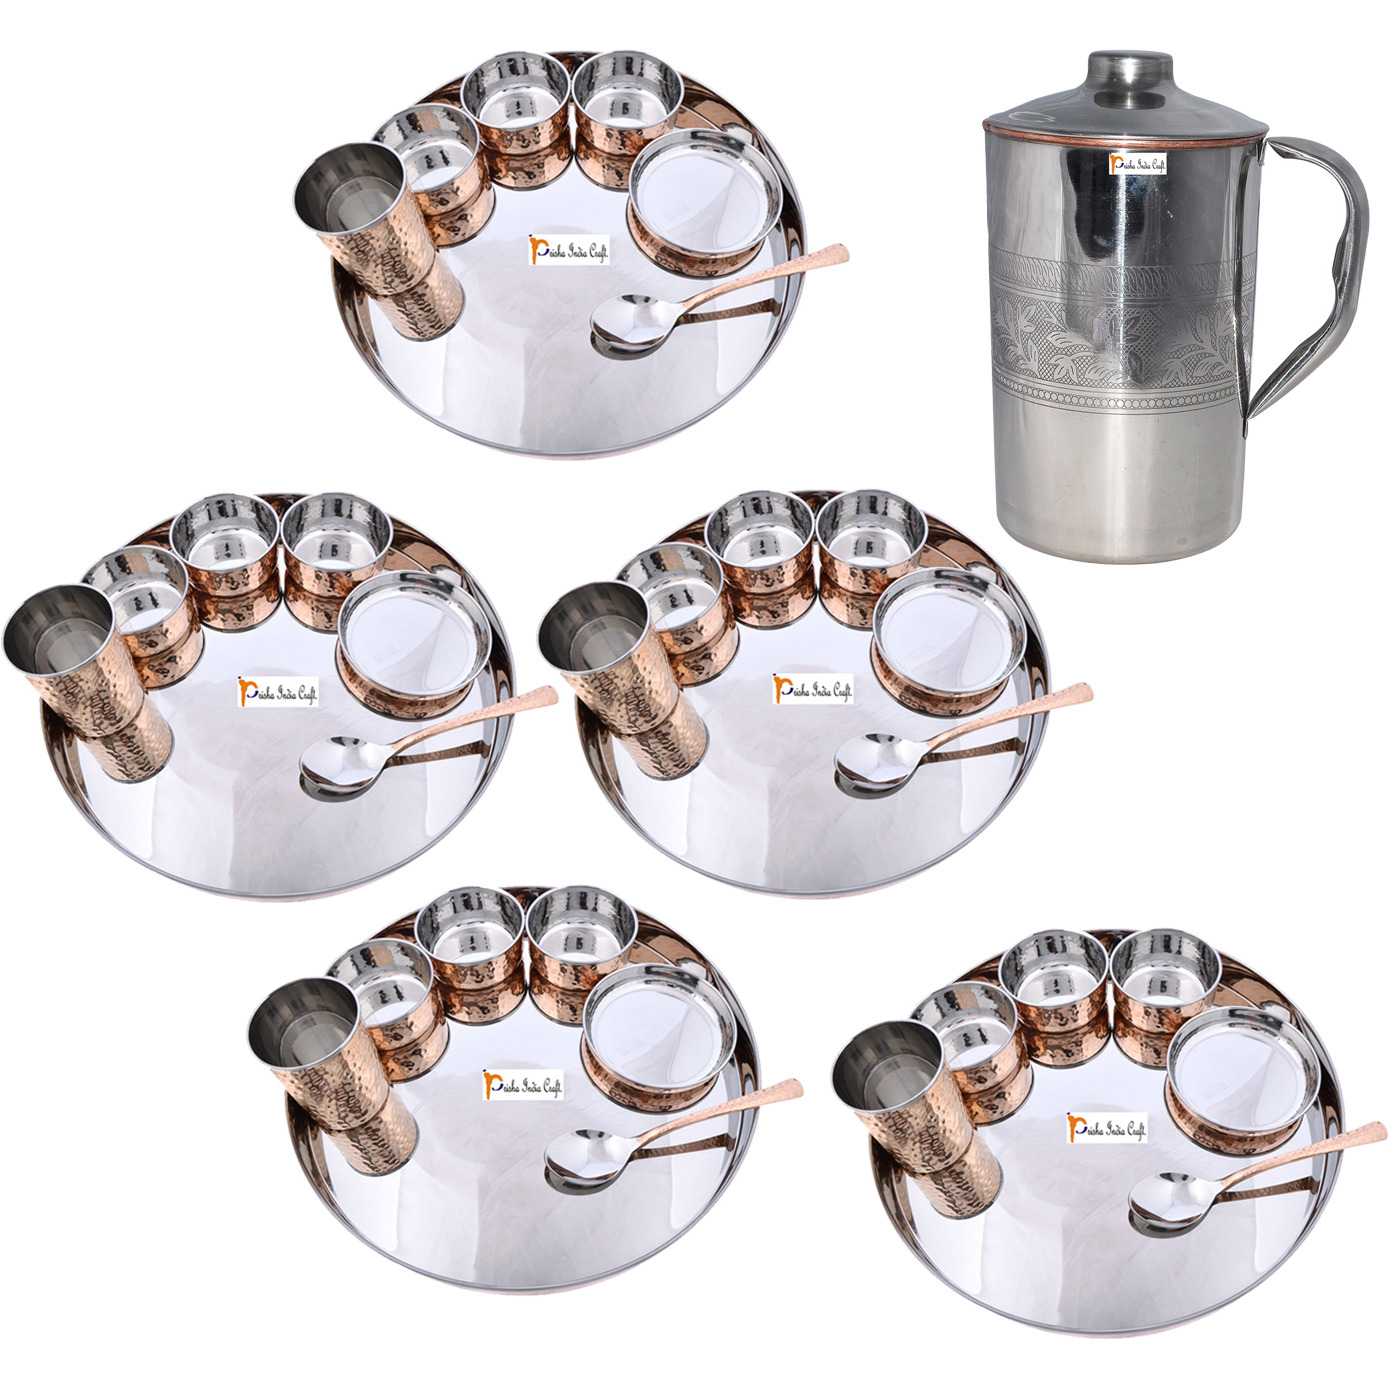 Prisha India Craft B. Set of 5 Dinnerware Traditional Stainless Steel Copper Dinner Set of Thali Plate, Bowls, Glass and Spoon, Dia 13  With 1 Embossed Stainless Steel Copper Pitcher Jug - Christmas Gift